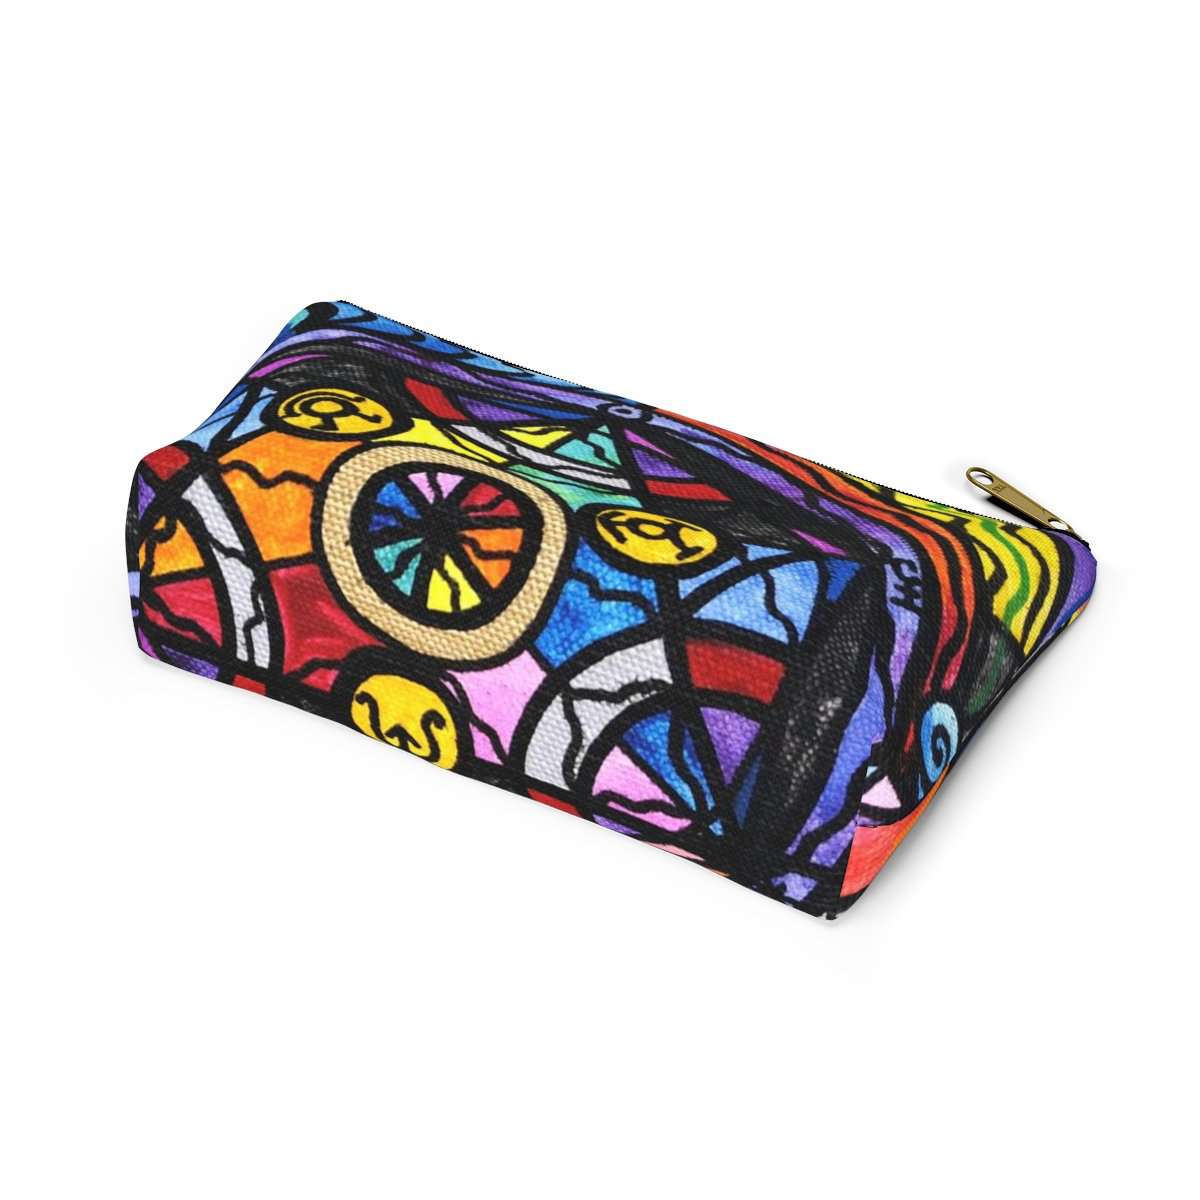 we-are-the-best-place-to-buy-alchemy-accessory-pouch-w-t-bottom-sale_11.jpg